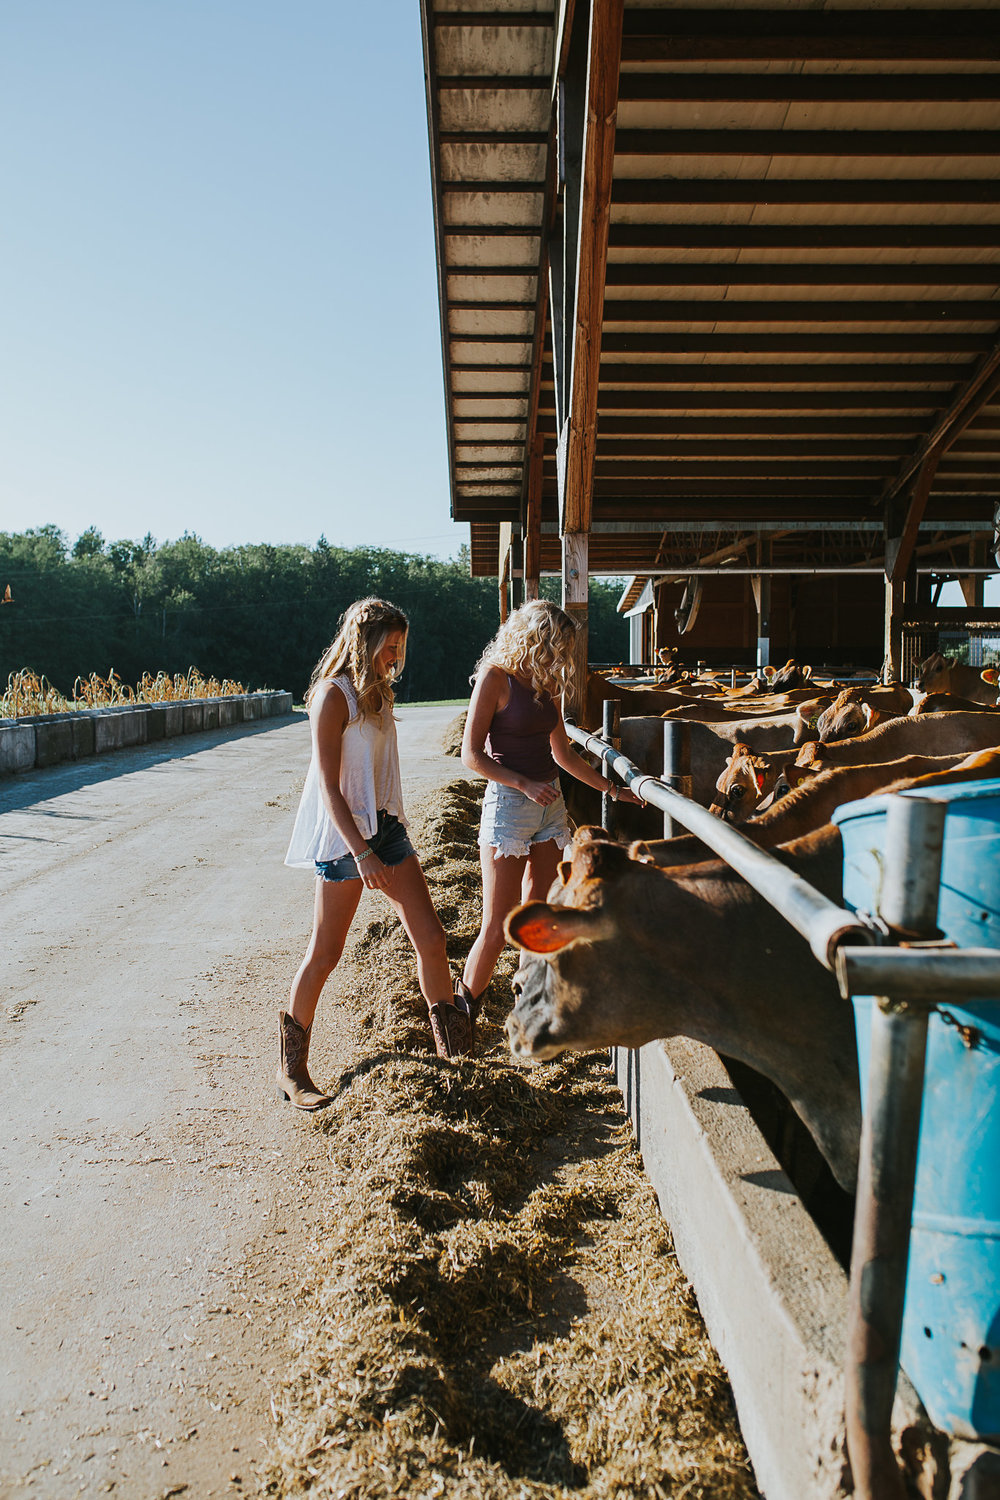 Country Sisters growing up on a farm in the PNW